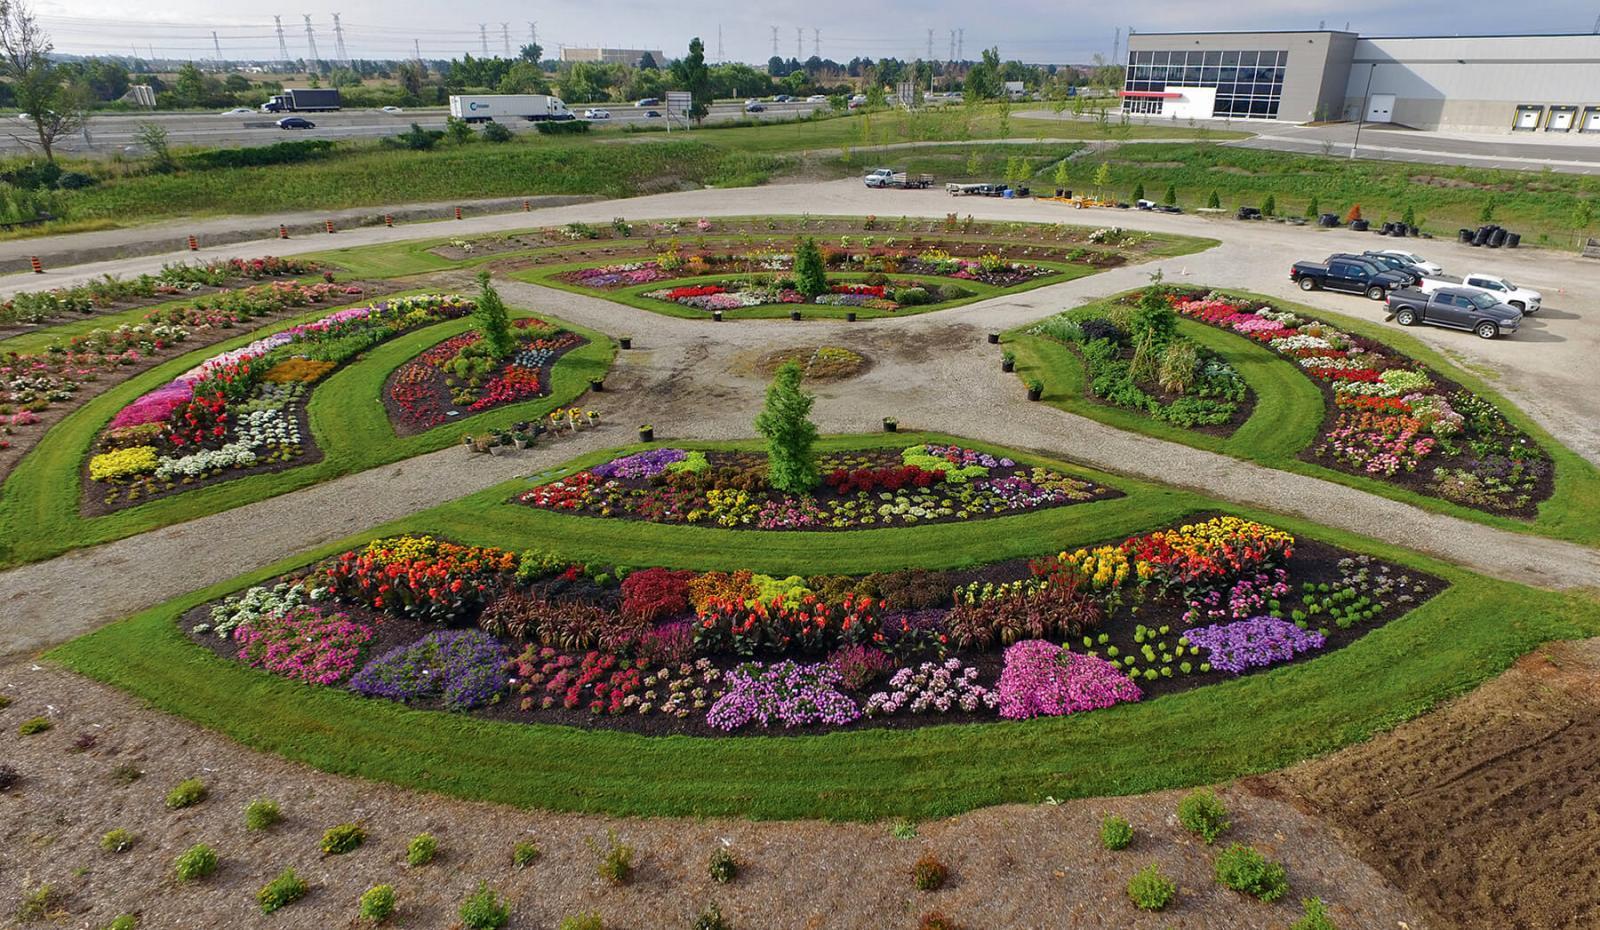 Watch the videos at youtube.com/landscapeontario